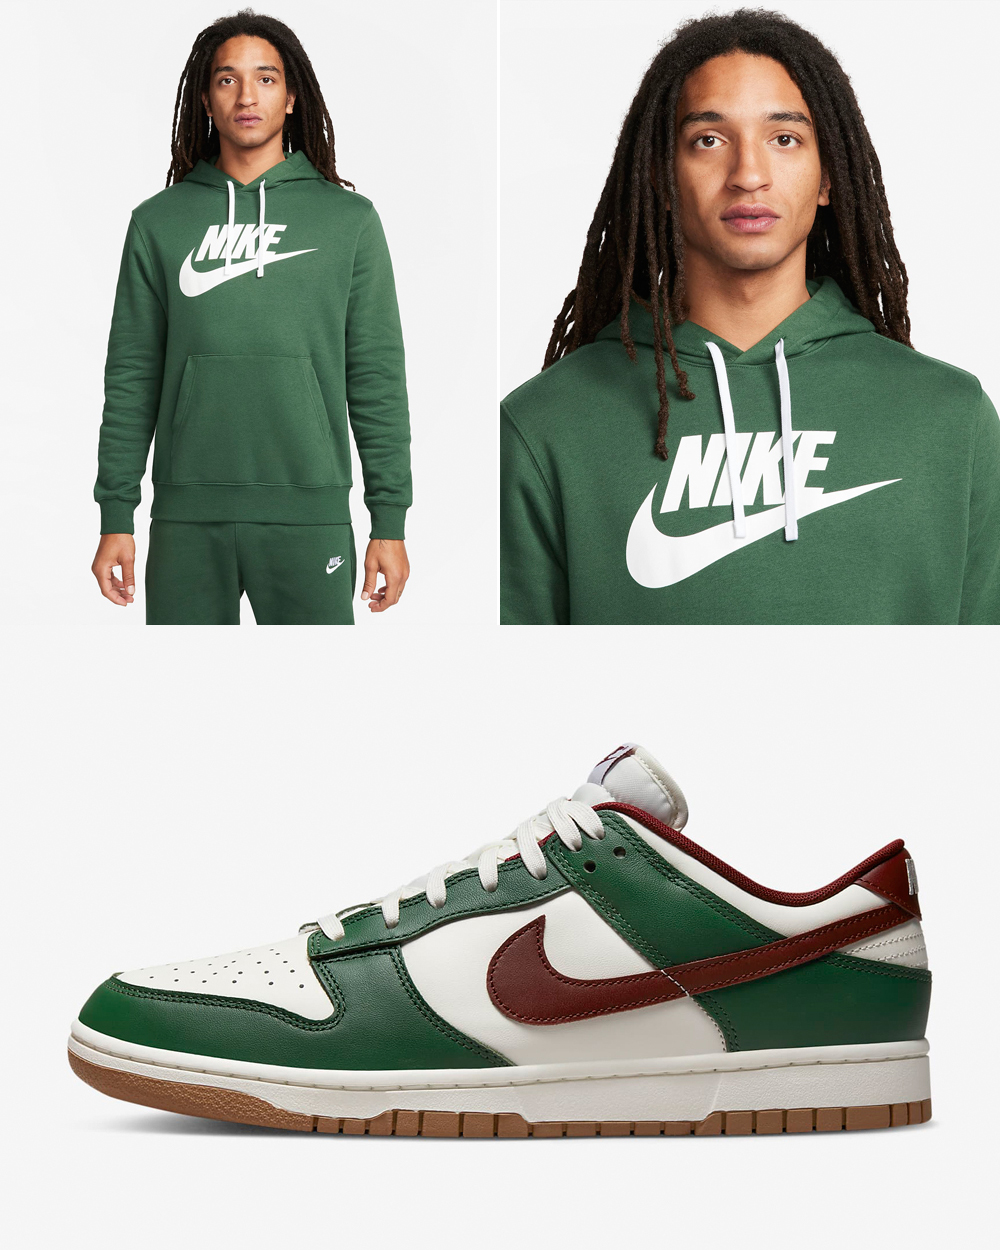 Nike Dunk Low Gorge Green Hoodie Outfit 1